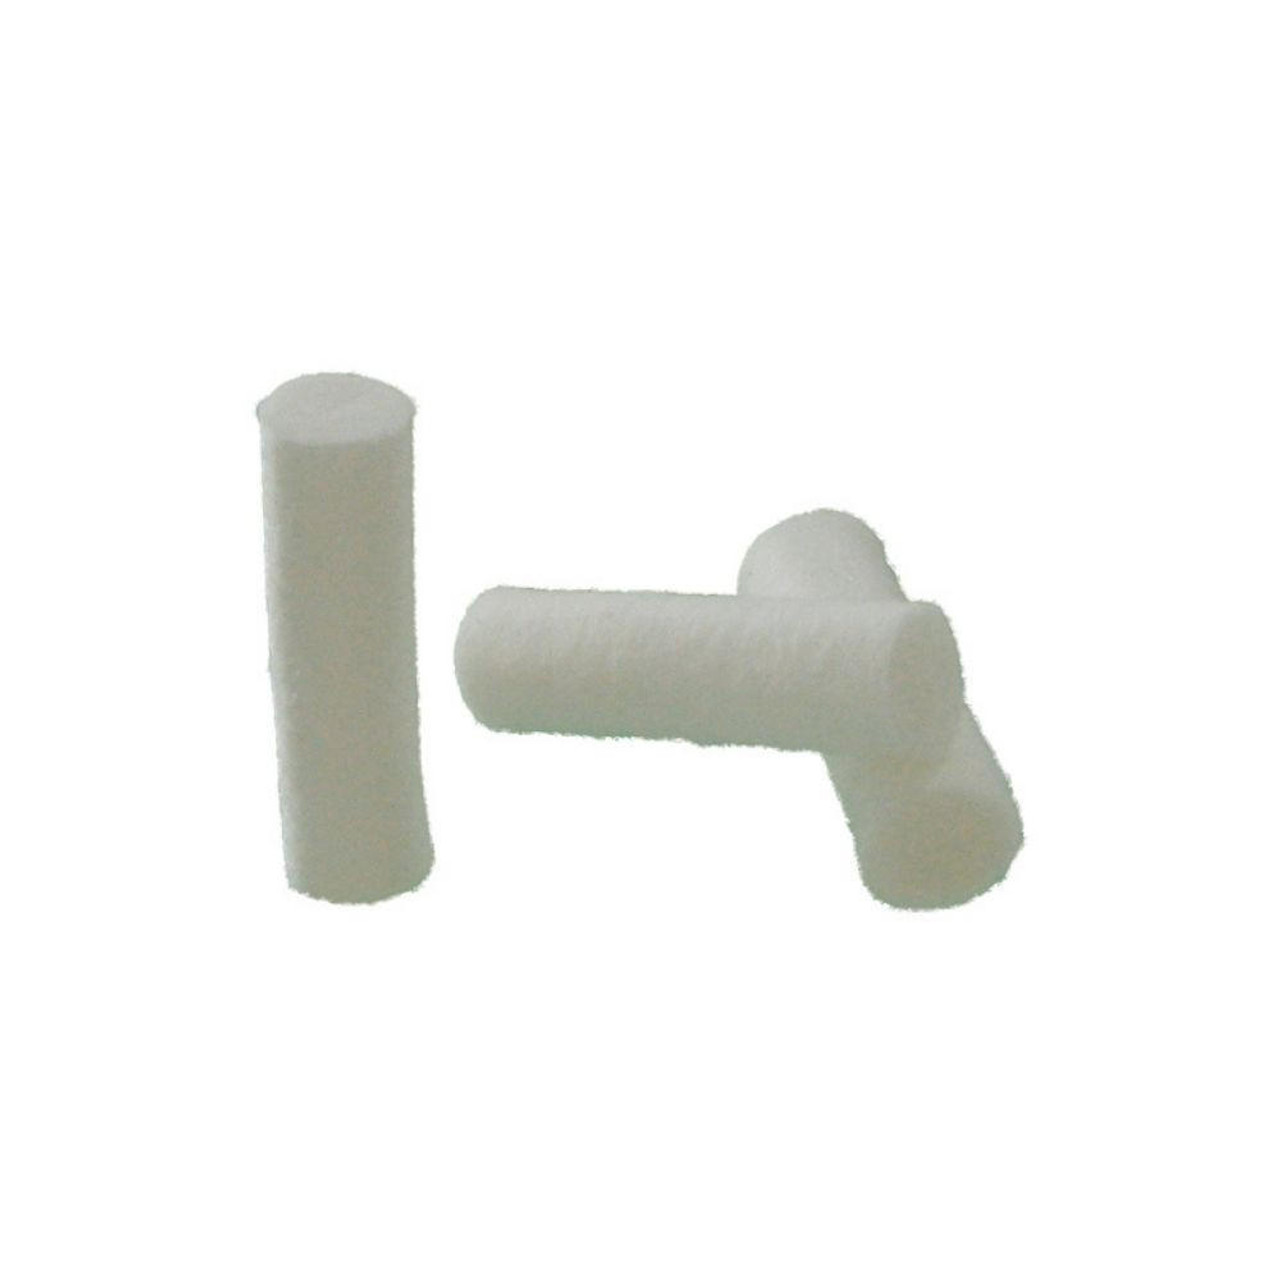 Nasal Plugs Pack of 50 for Nose Bleeds